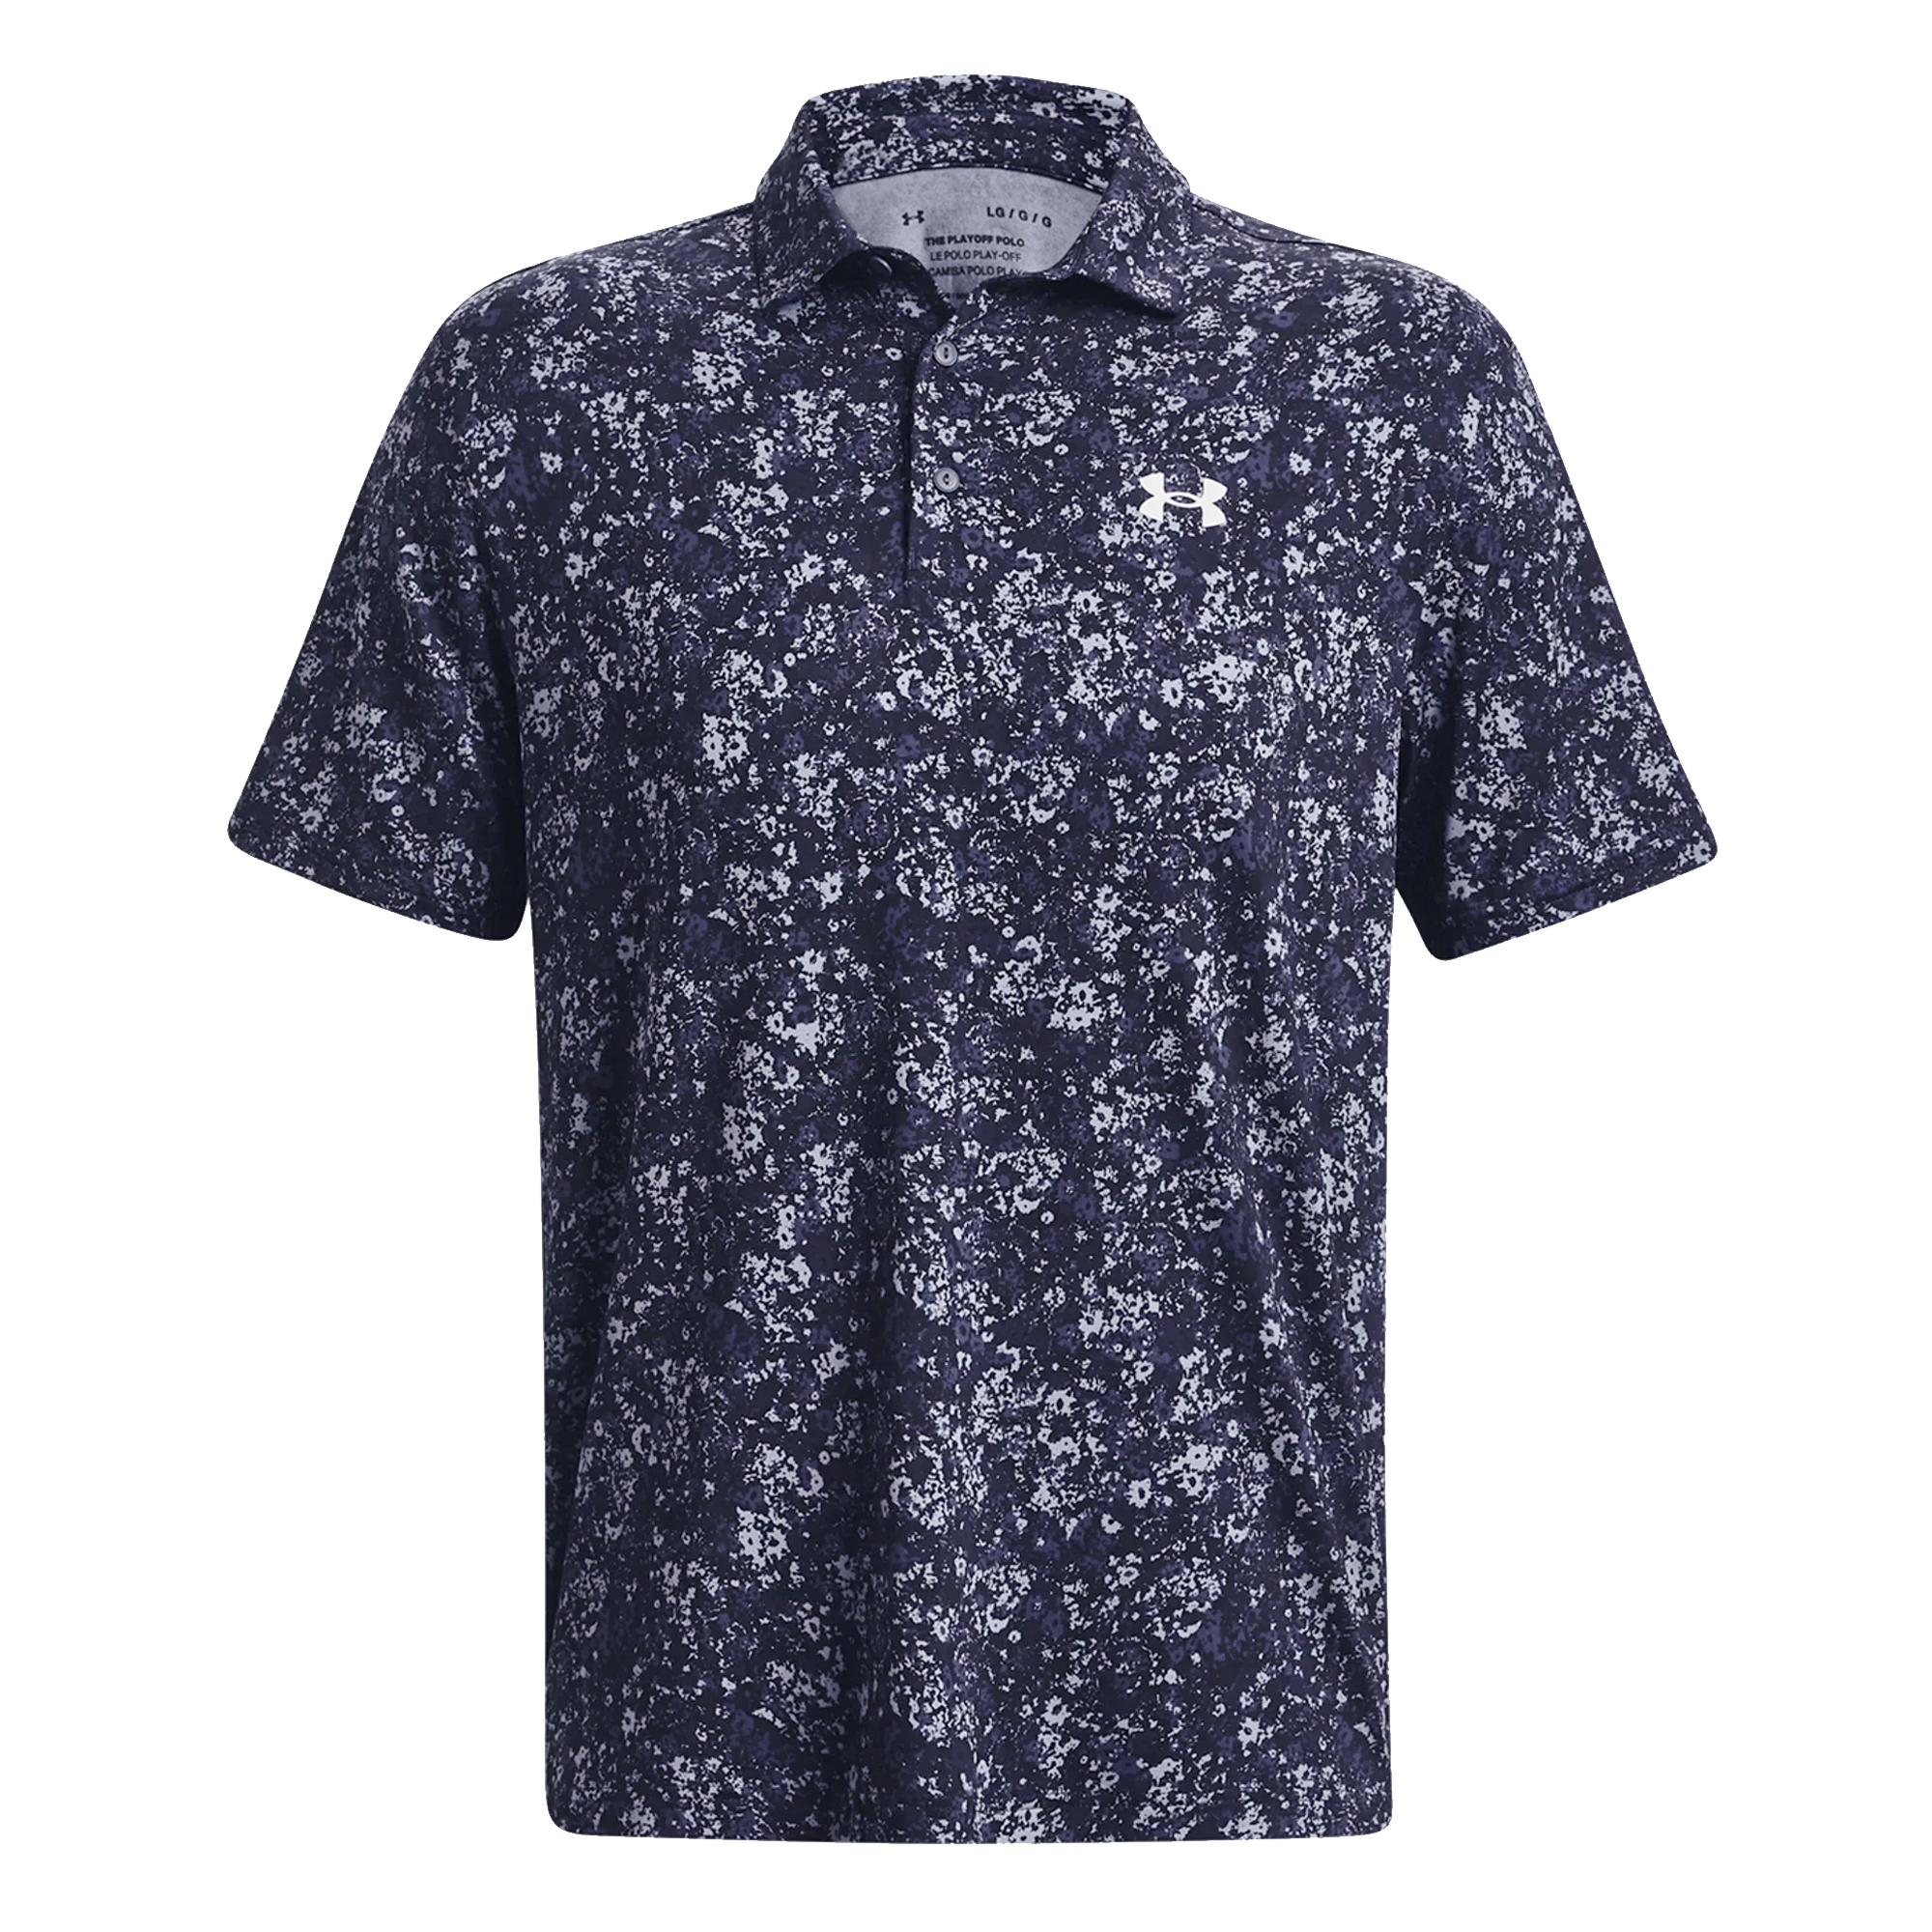 Under Armour Mens Playoff 3.0 Printed Golf Polo Shirt  - Midnight Navy/Halo Grey